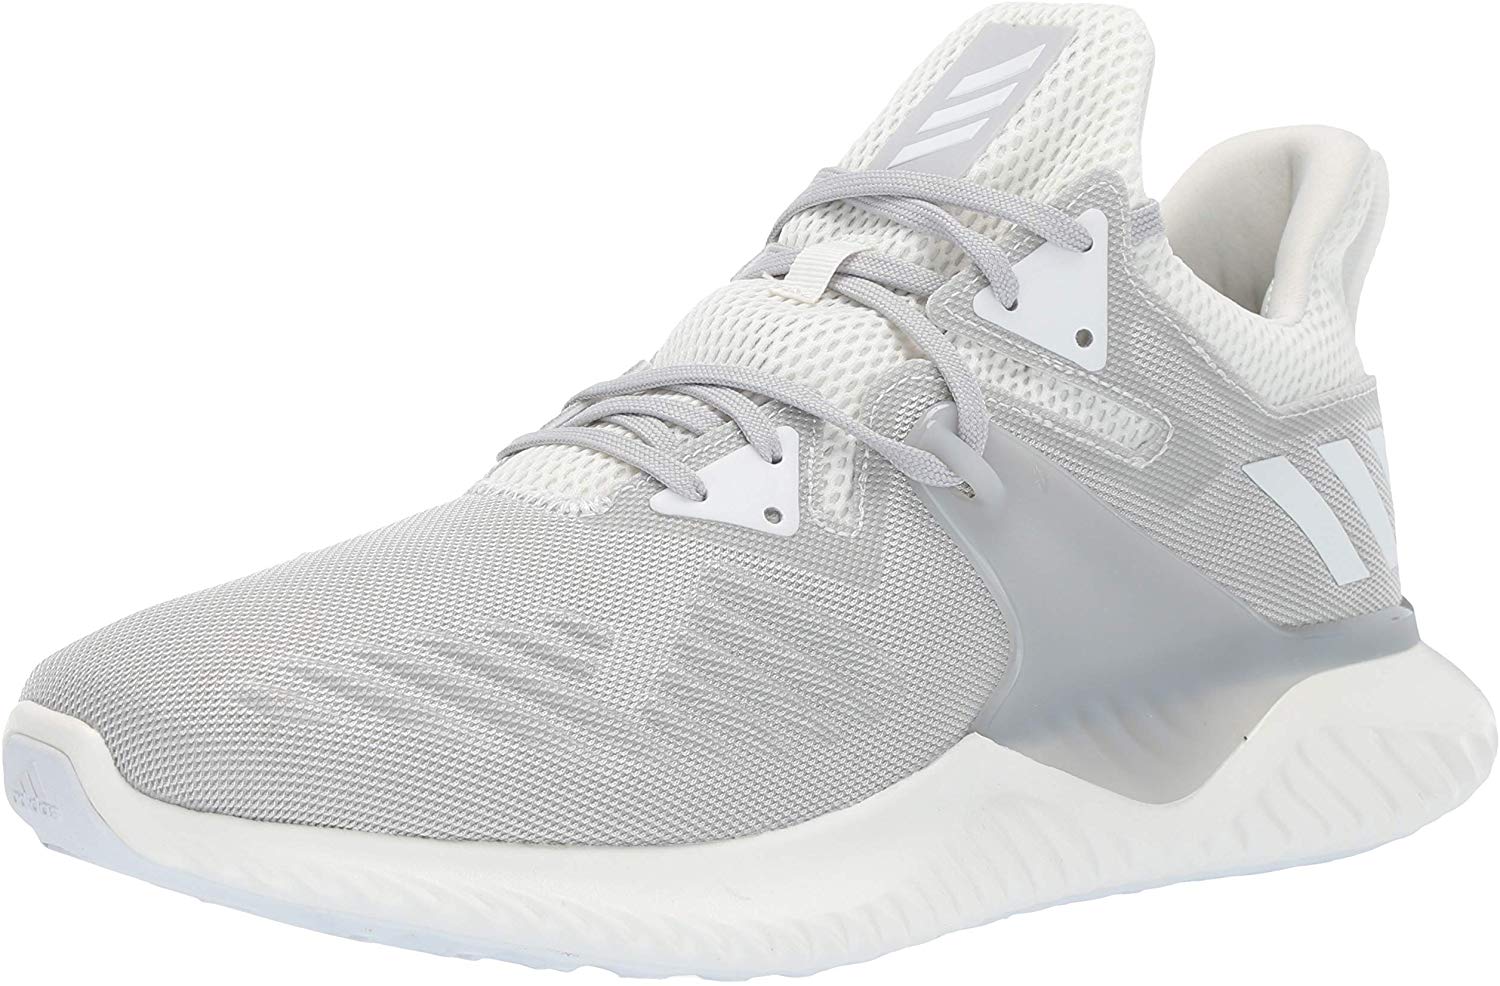 adidas alphabounce beyond mens running shoes